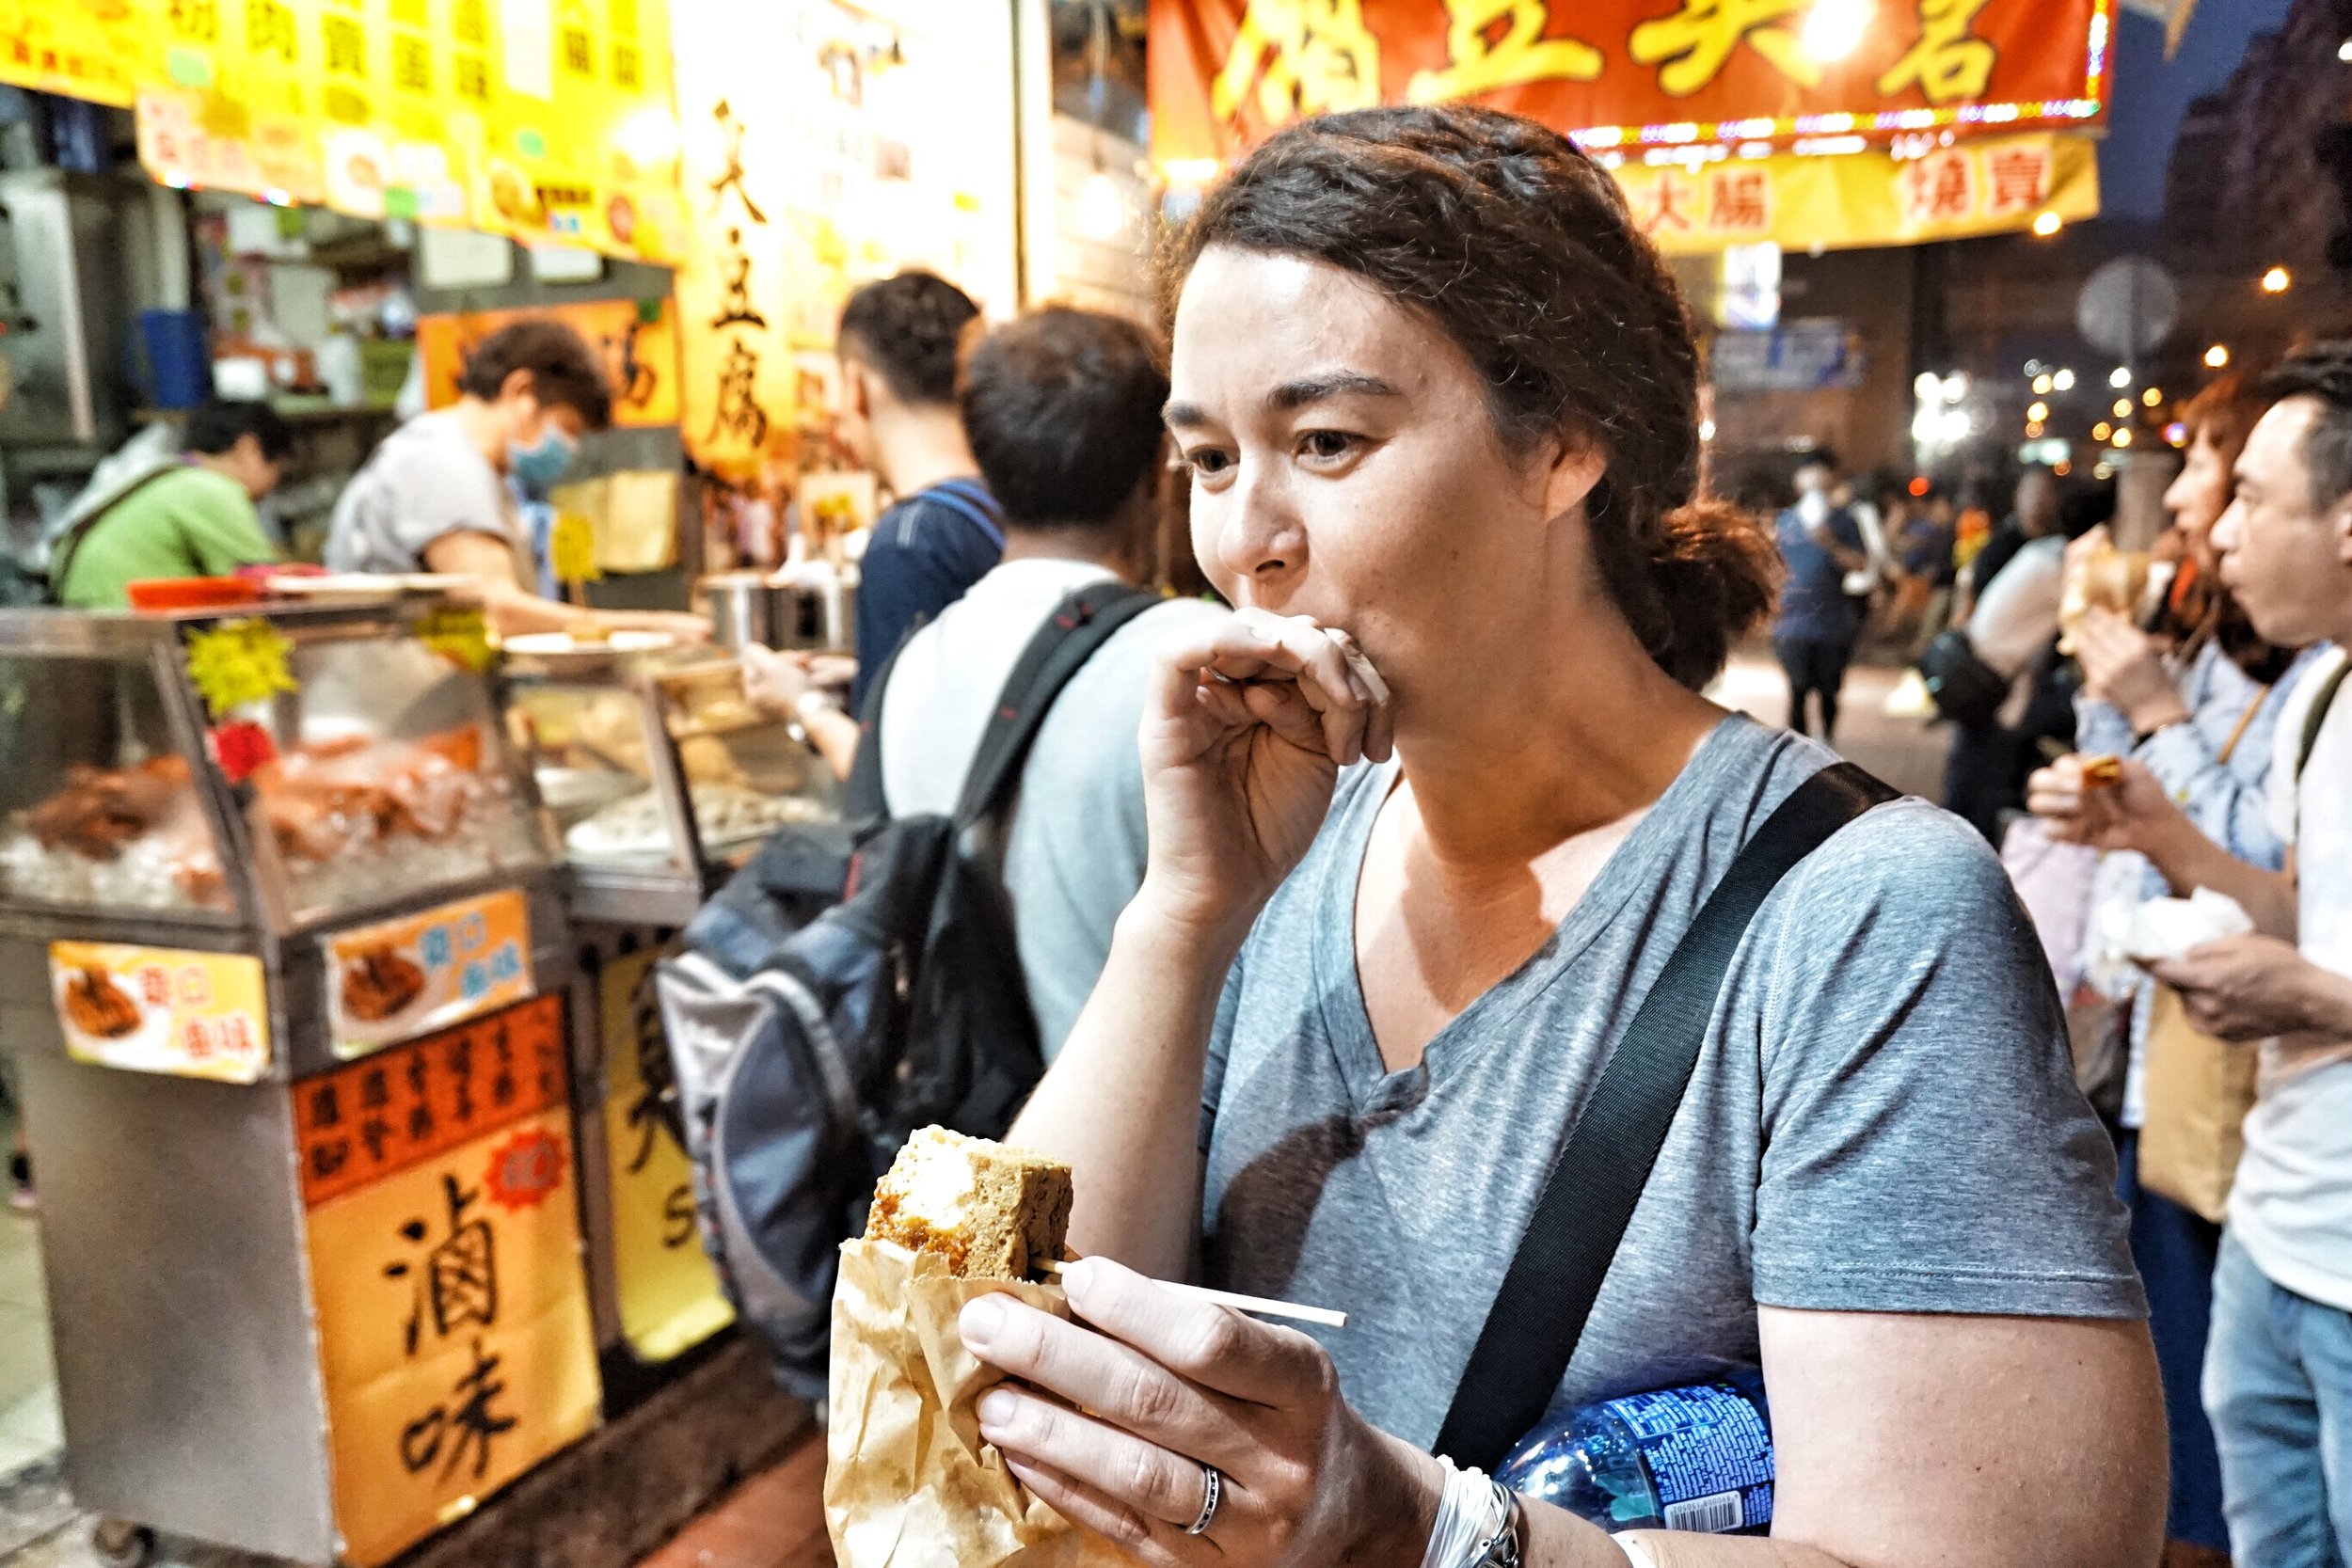 Private tour guide Jess tries the stinky tofu during one of her night tours in Kowloon. The big question is, did she like it!?